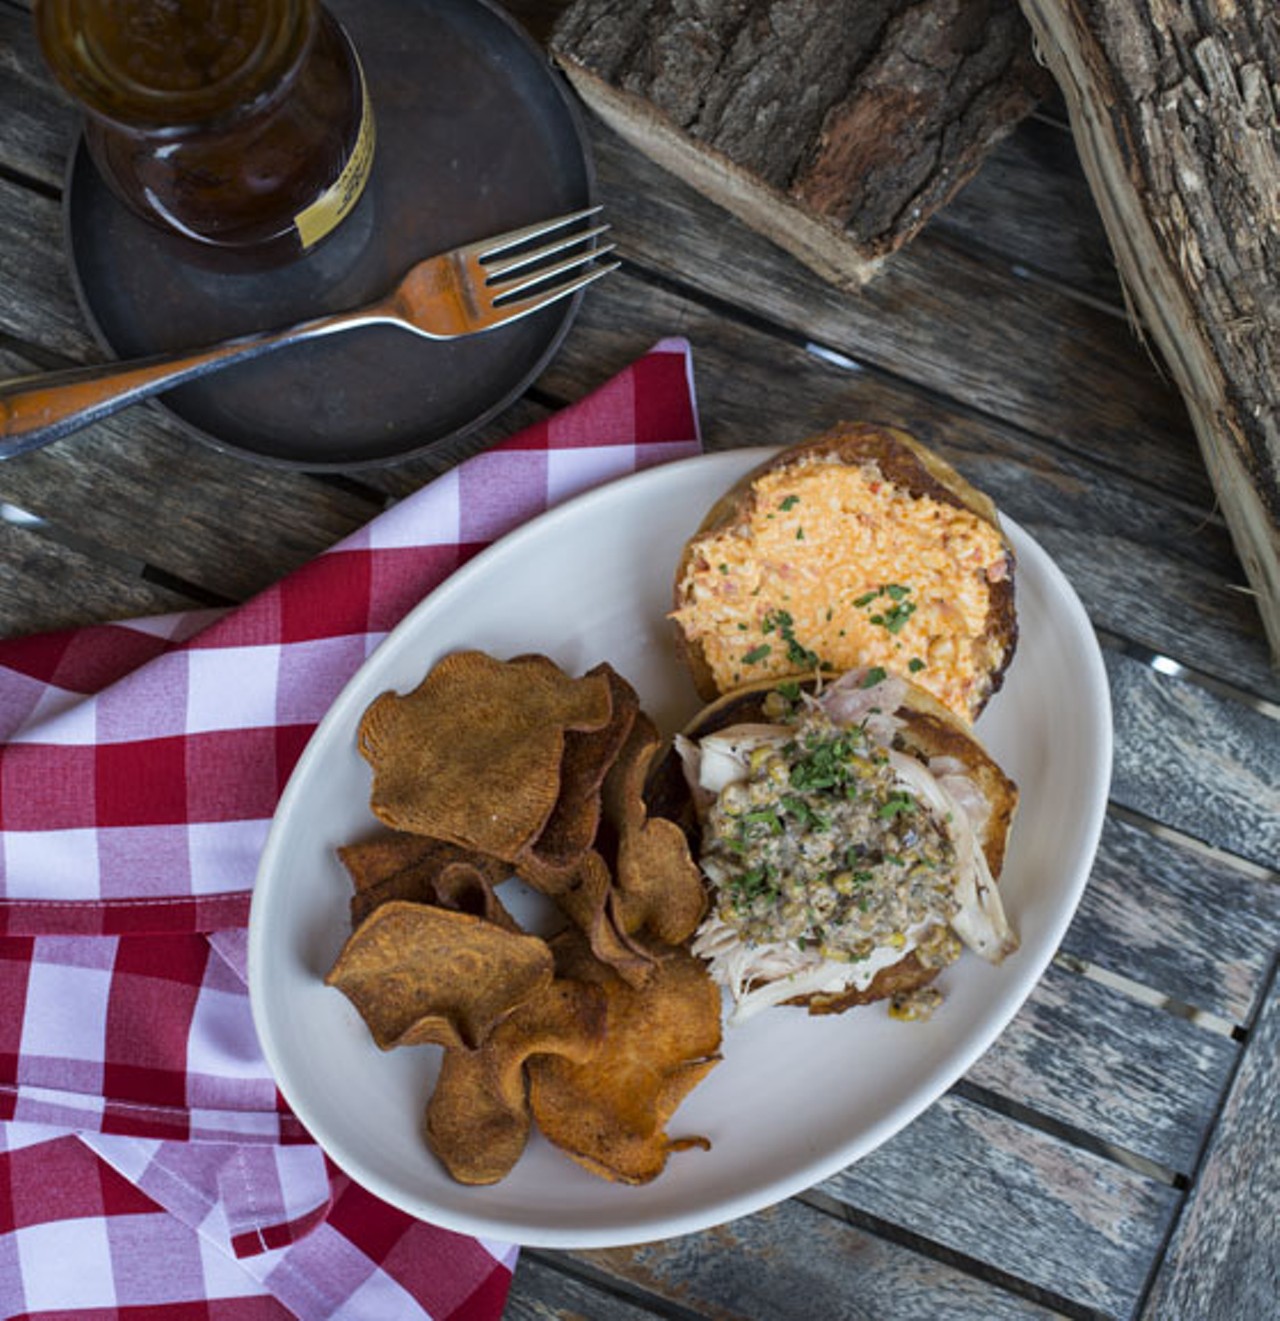 Pulled chicken with pimento cheddar, street corn relish and a side of barbecue sweet potato chips.